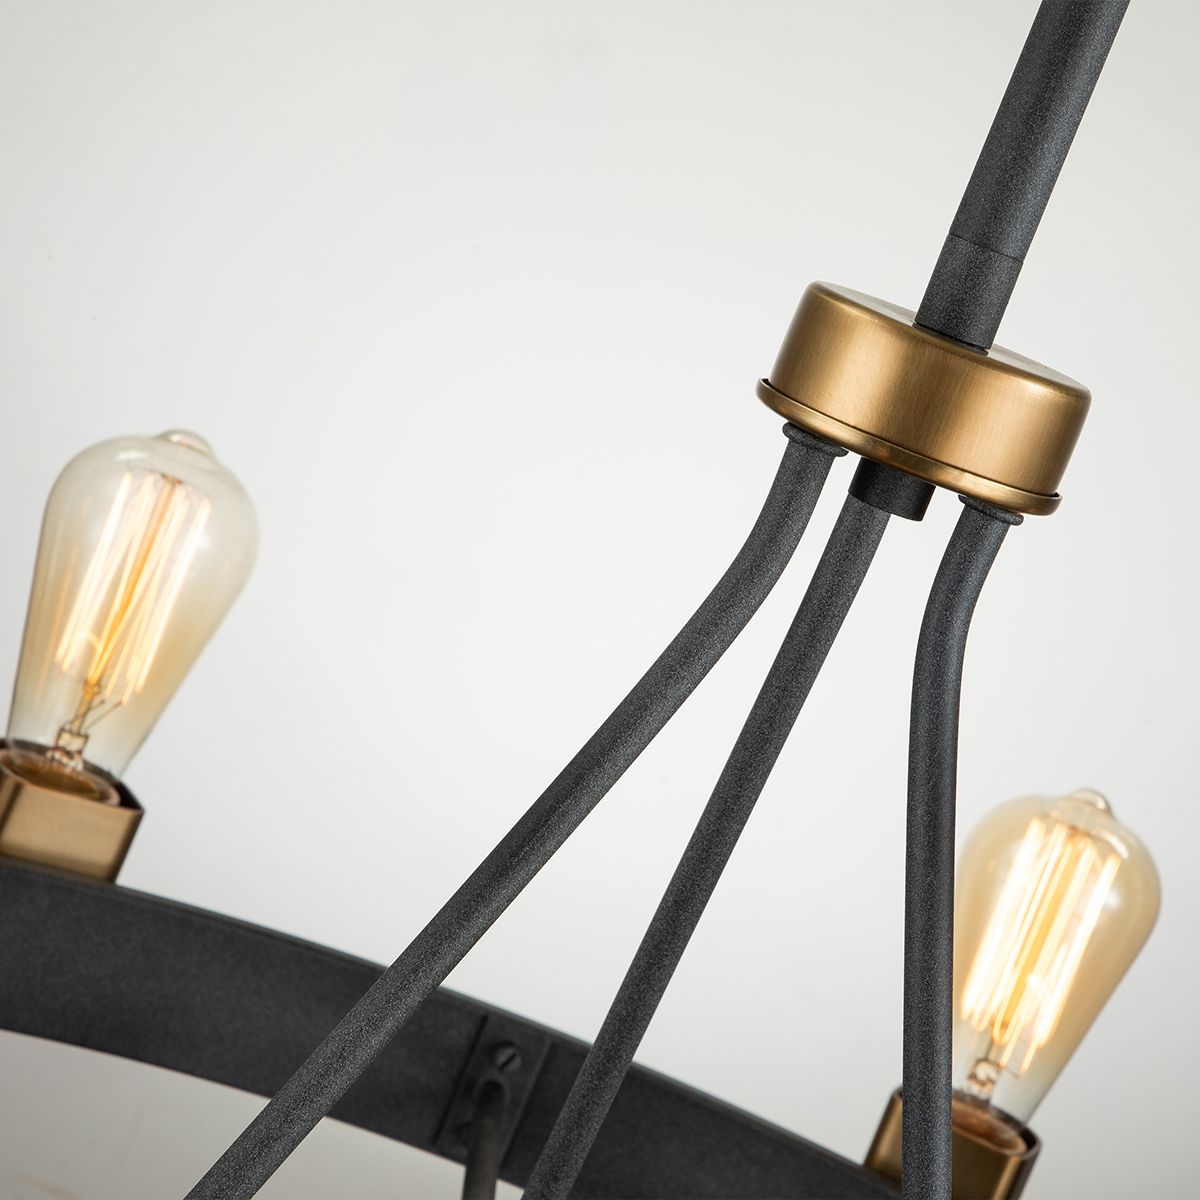 8 Light Ceiling Light In Aged Zinc And Heritage Brass Finish